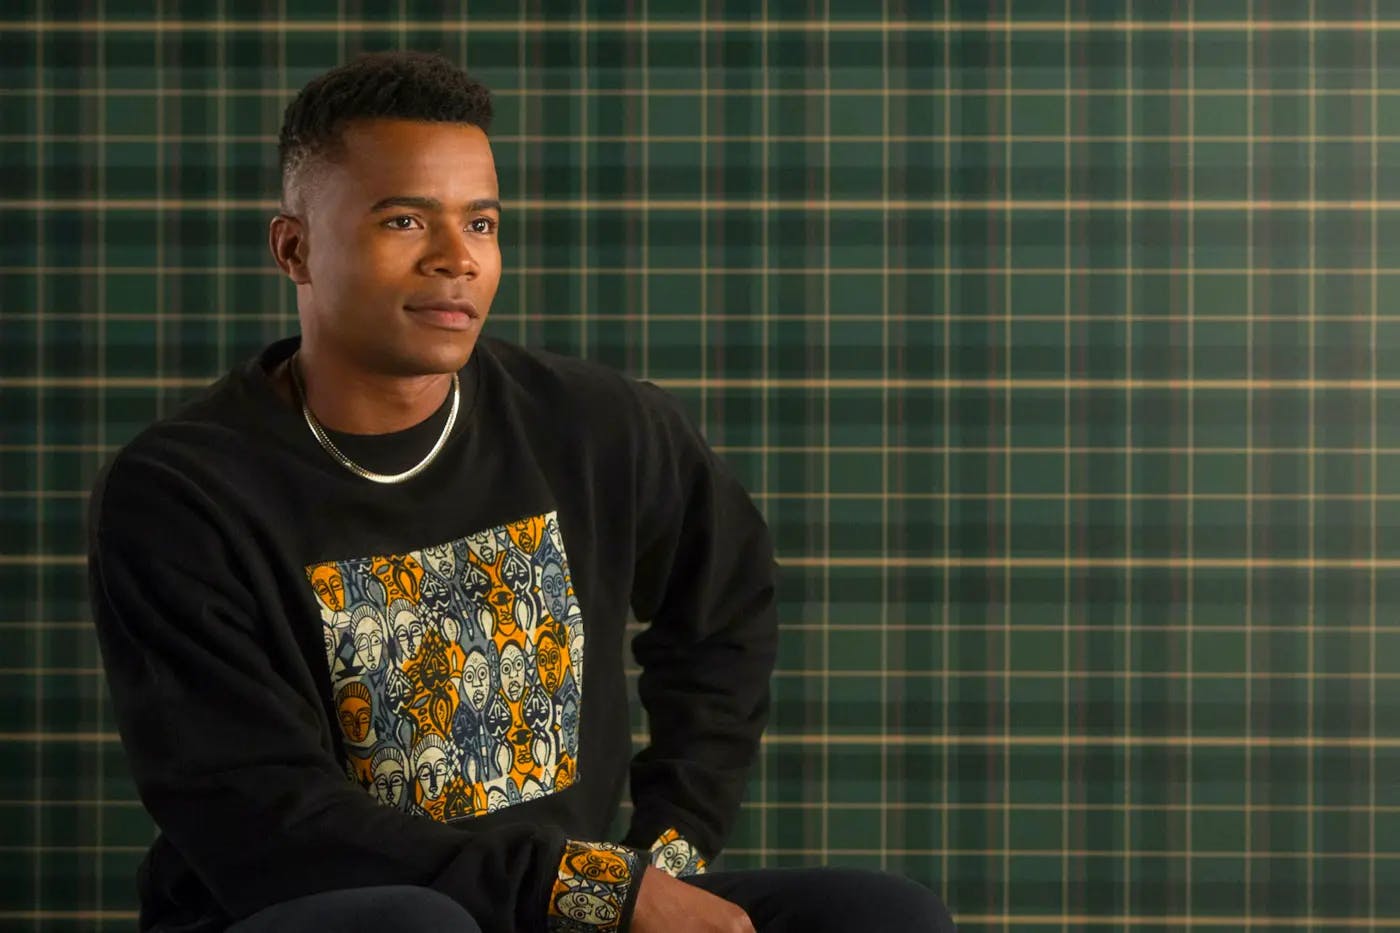 Reggie Green (Marque Richardson) sits relaxed in front of a green checked background.  He wears a silver necklace, dark blue jeans, and a black sweatshirt with sections on the front and cuffs that feature a grey and yellow abstract print of faces.